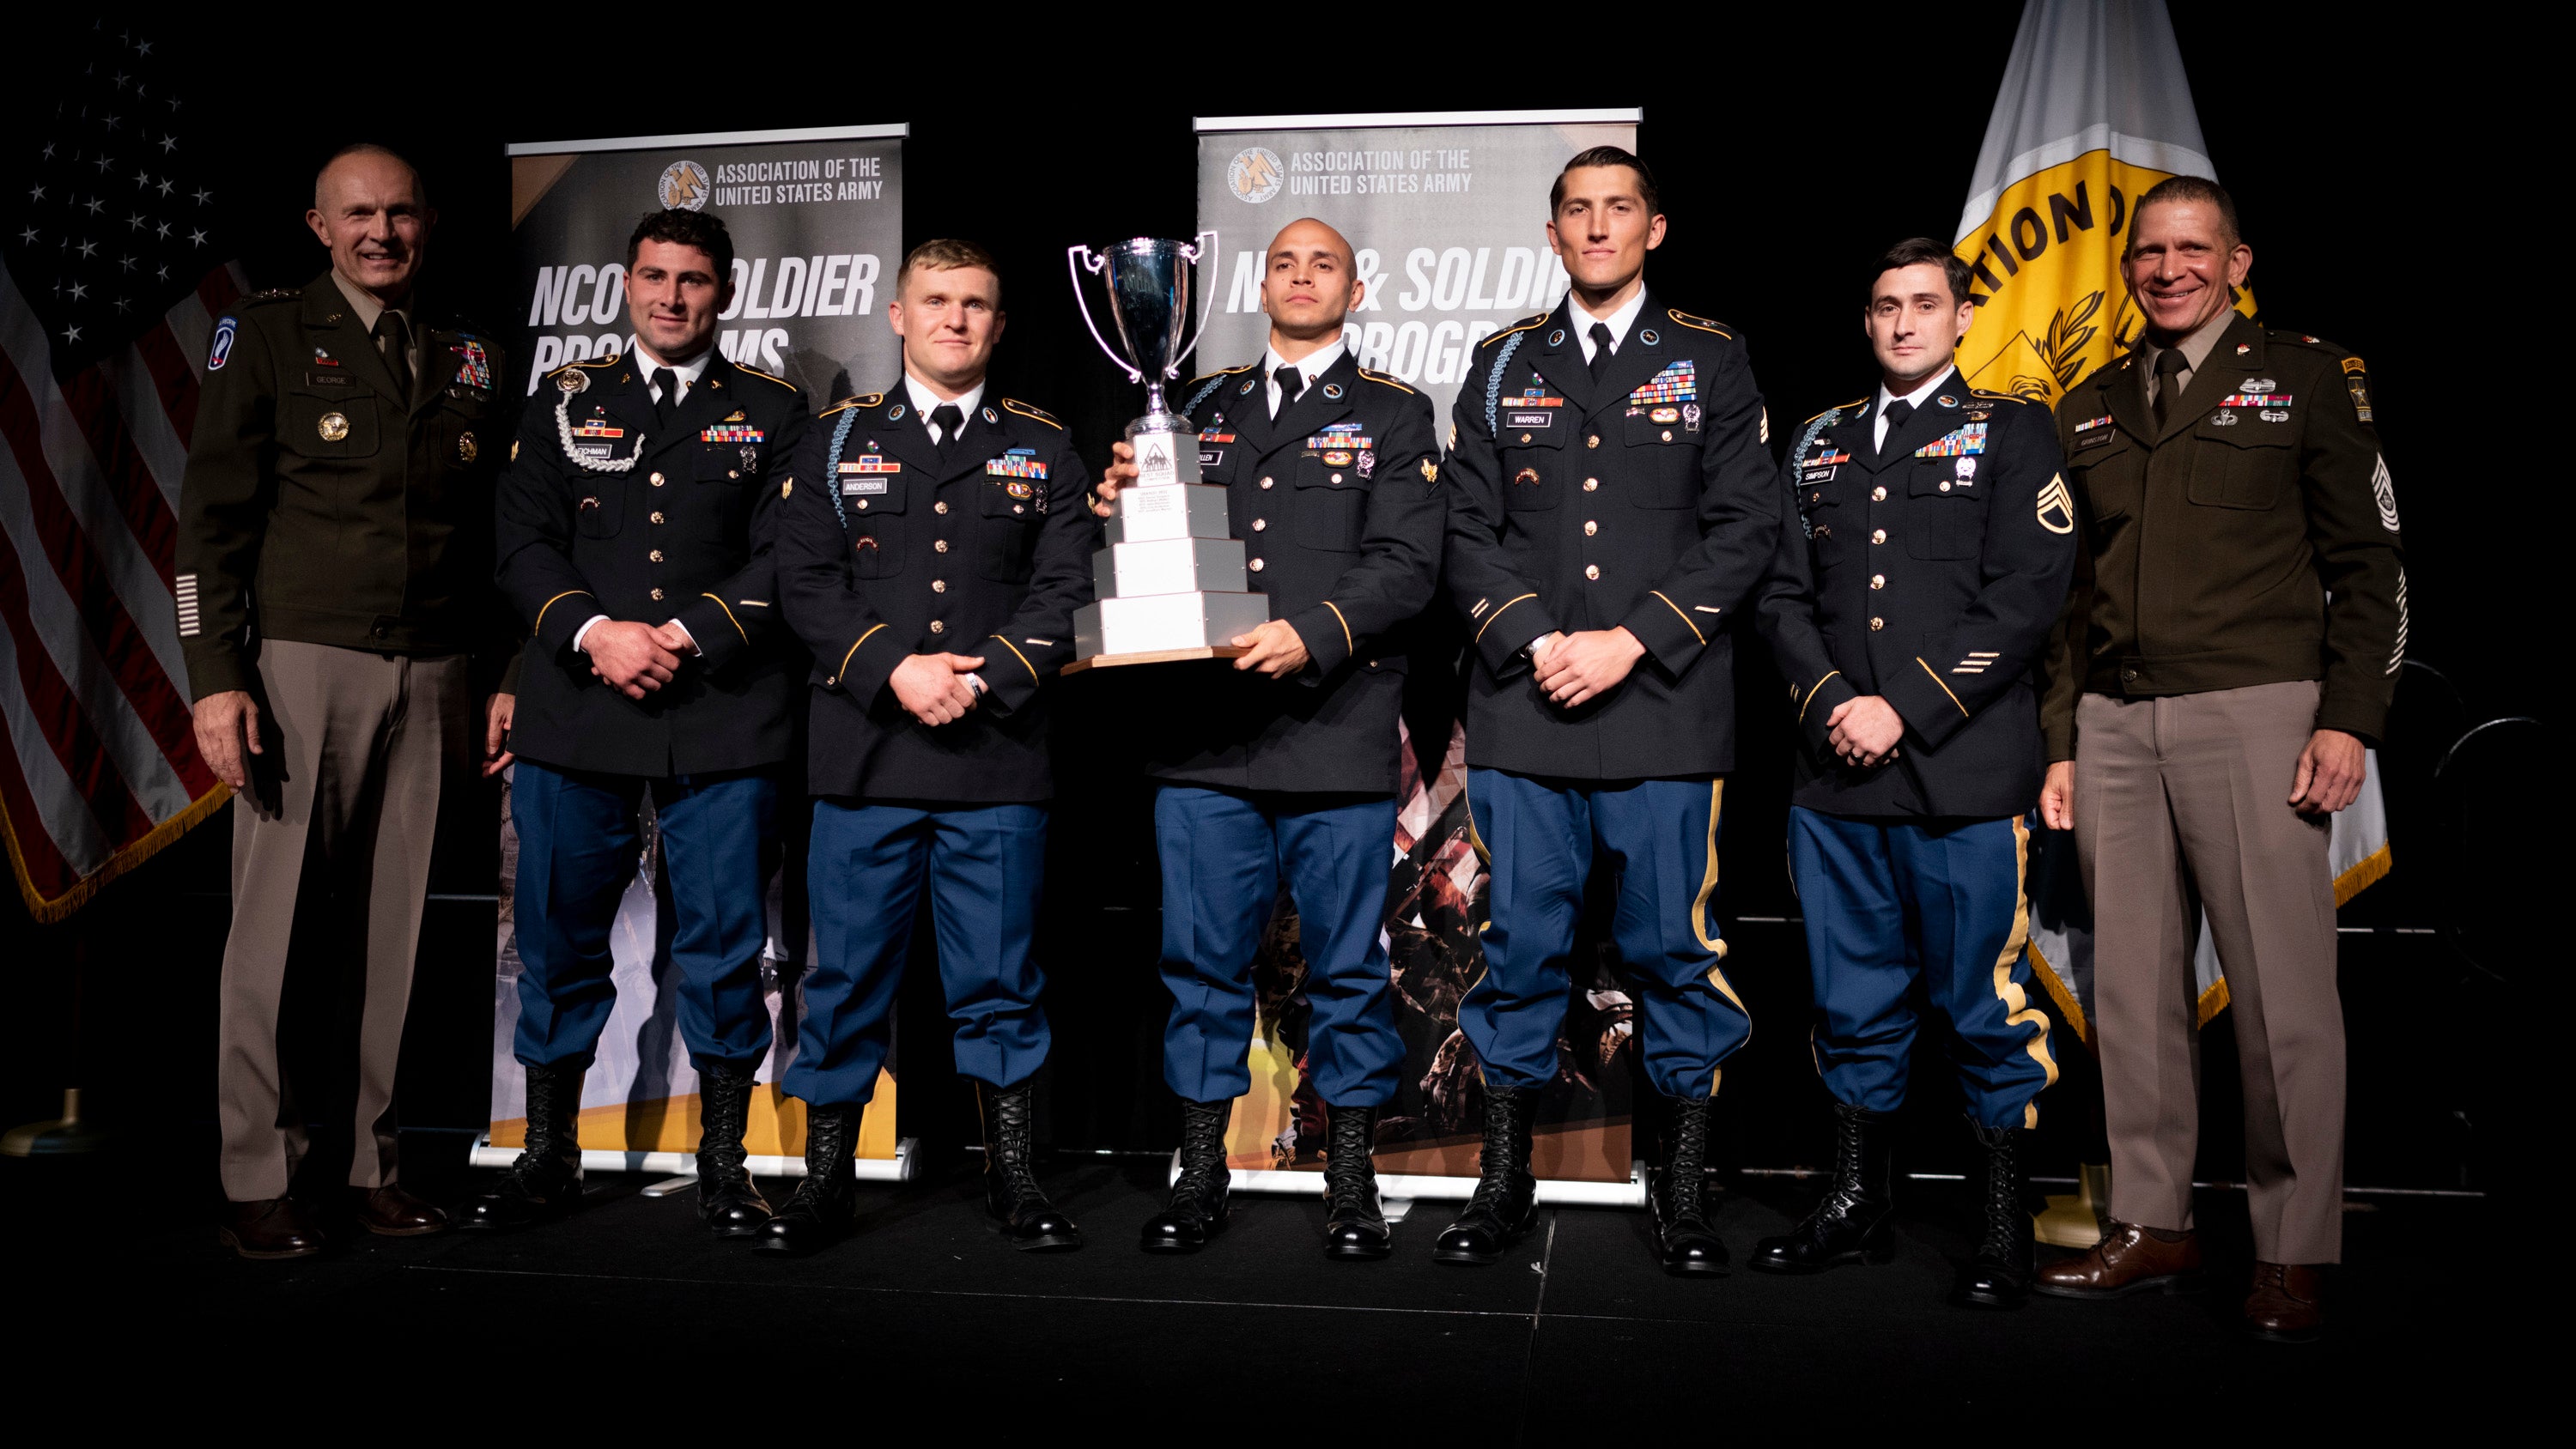 Soldiers representing the U.S. Army Special Operations Command accept the trophy for Best Squad during the Sergeant Major of the Army’s Recognition Luncheon at AUSA 2022 Annual Meeting in Washington, D.C., Monday, Oct. 10, 2022. (Jeromie Stephens for AUSA)